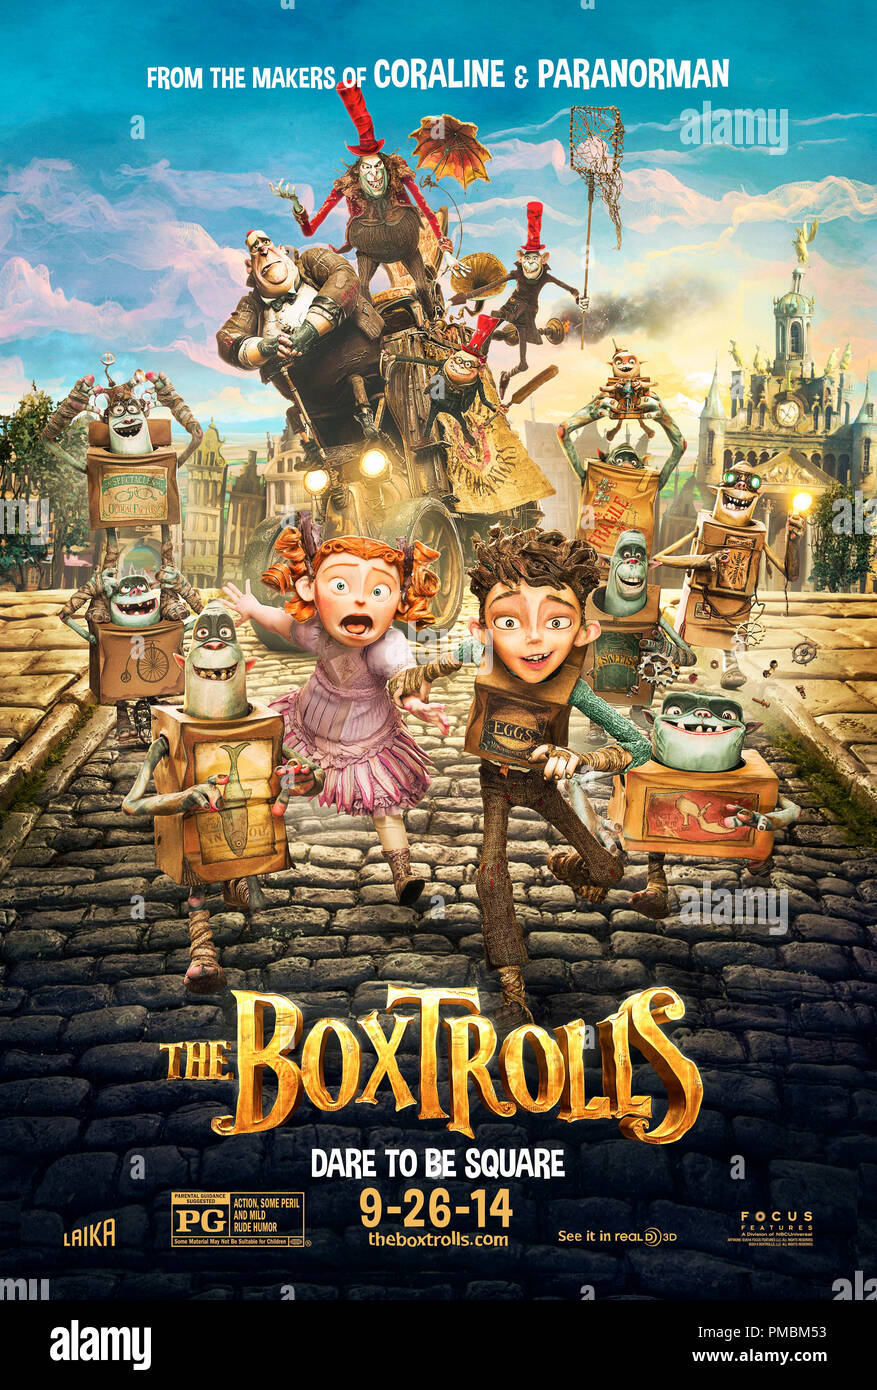 Focus Features' family event movie THE BOXTROLLS - Poster Stock Photo